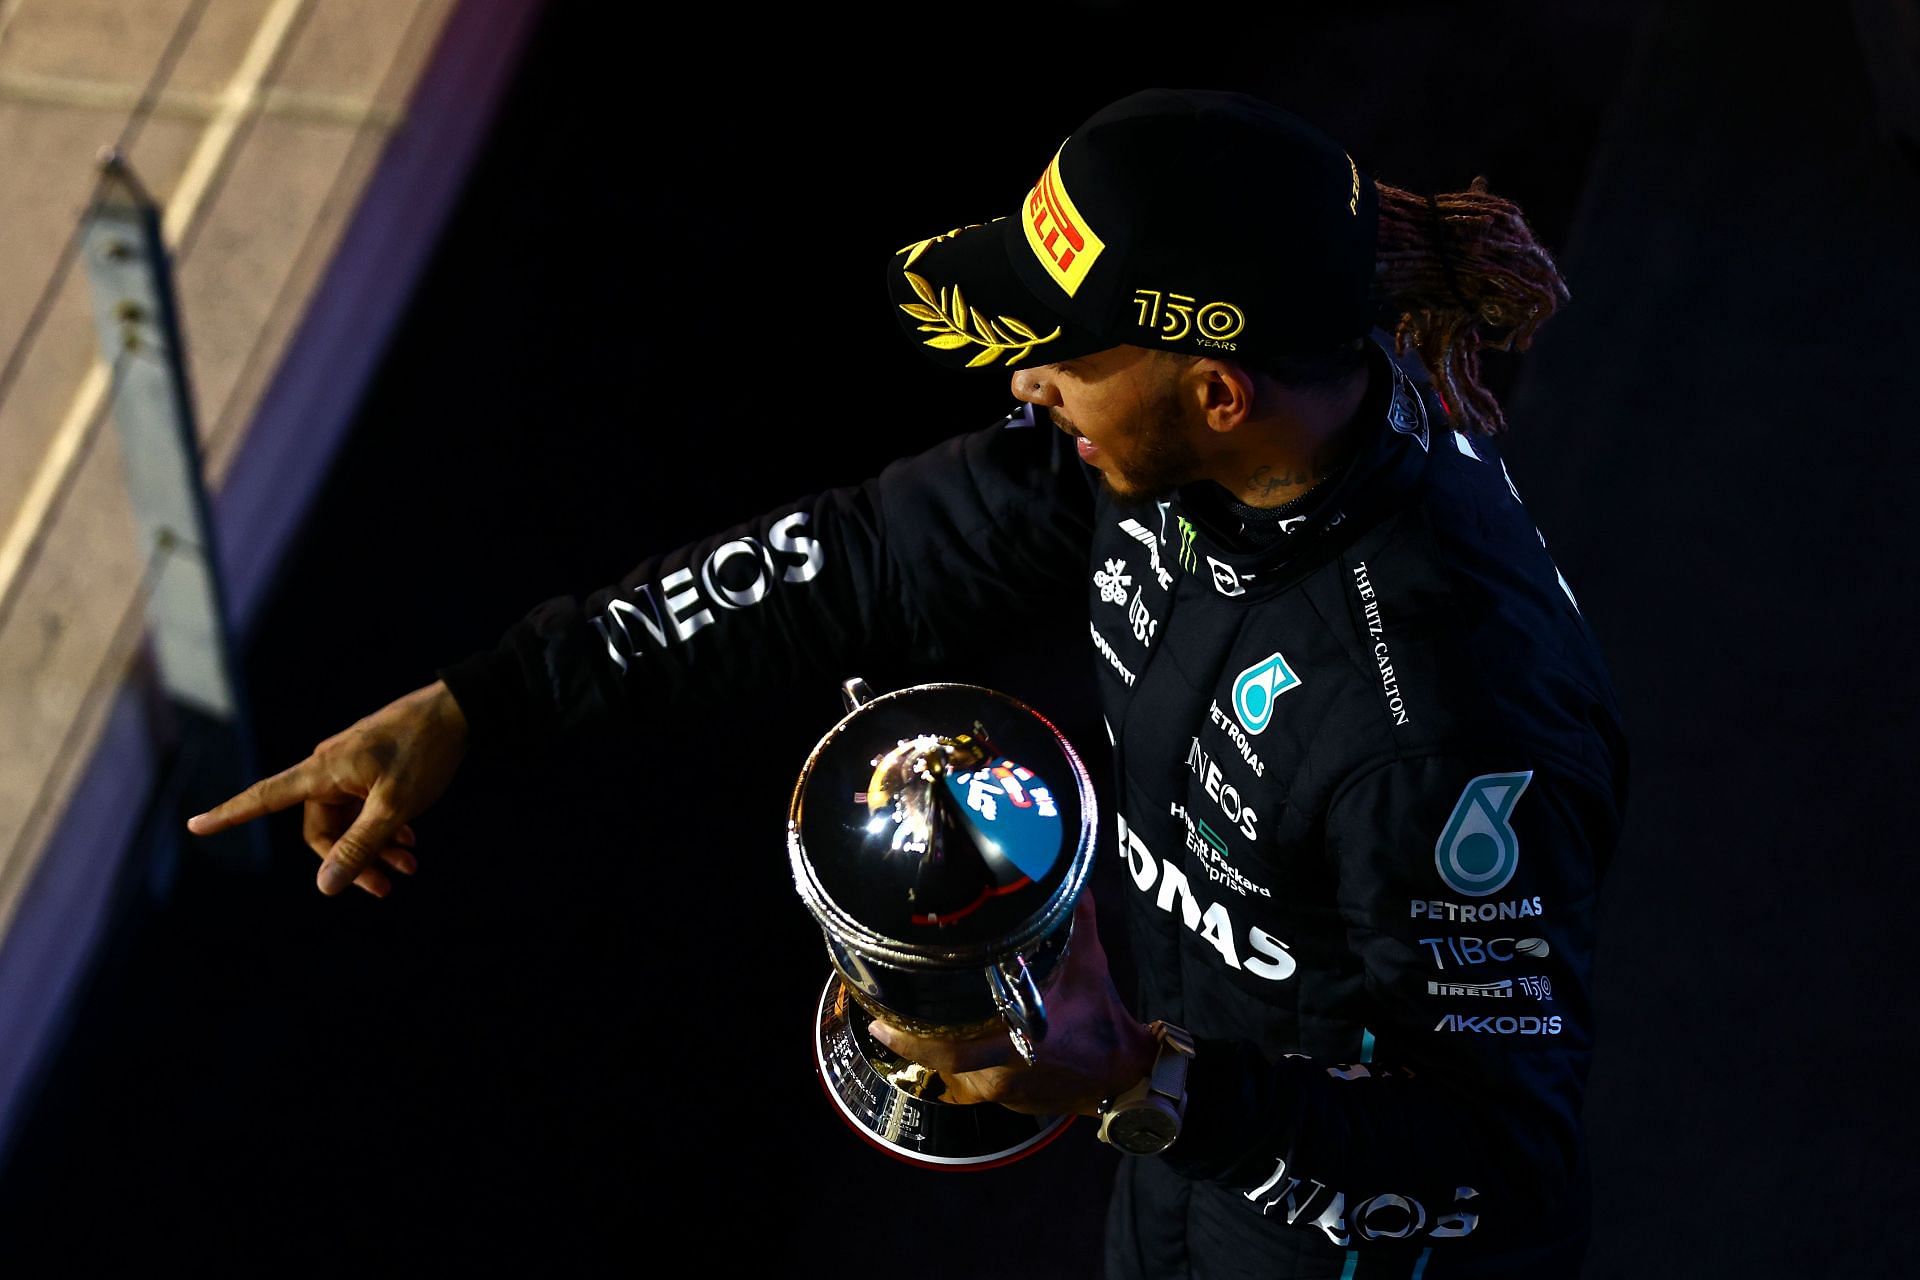 Lewis Hamilton is one of the greats, but he surely has his critics